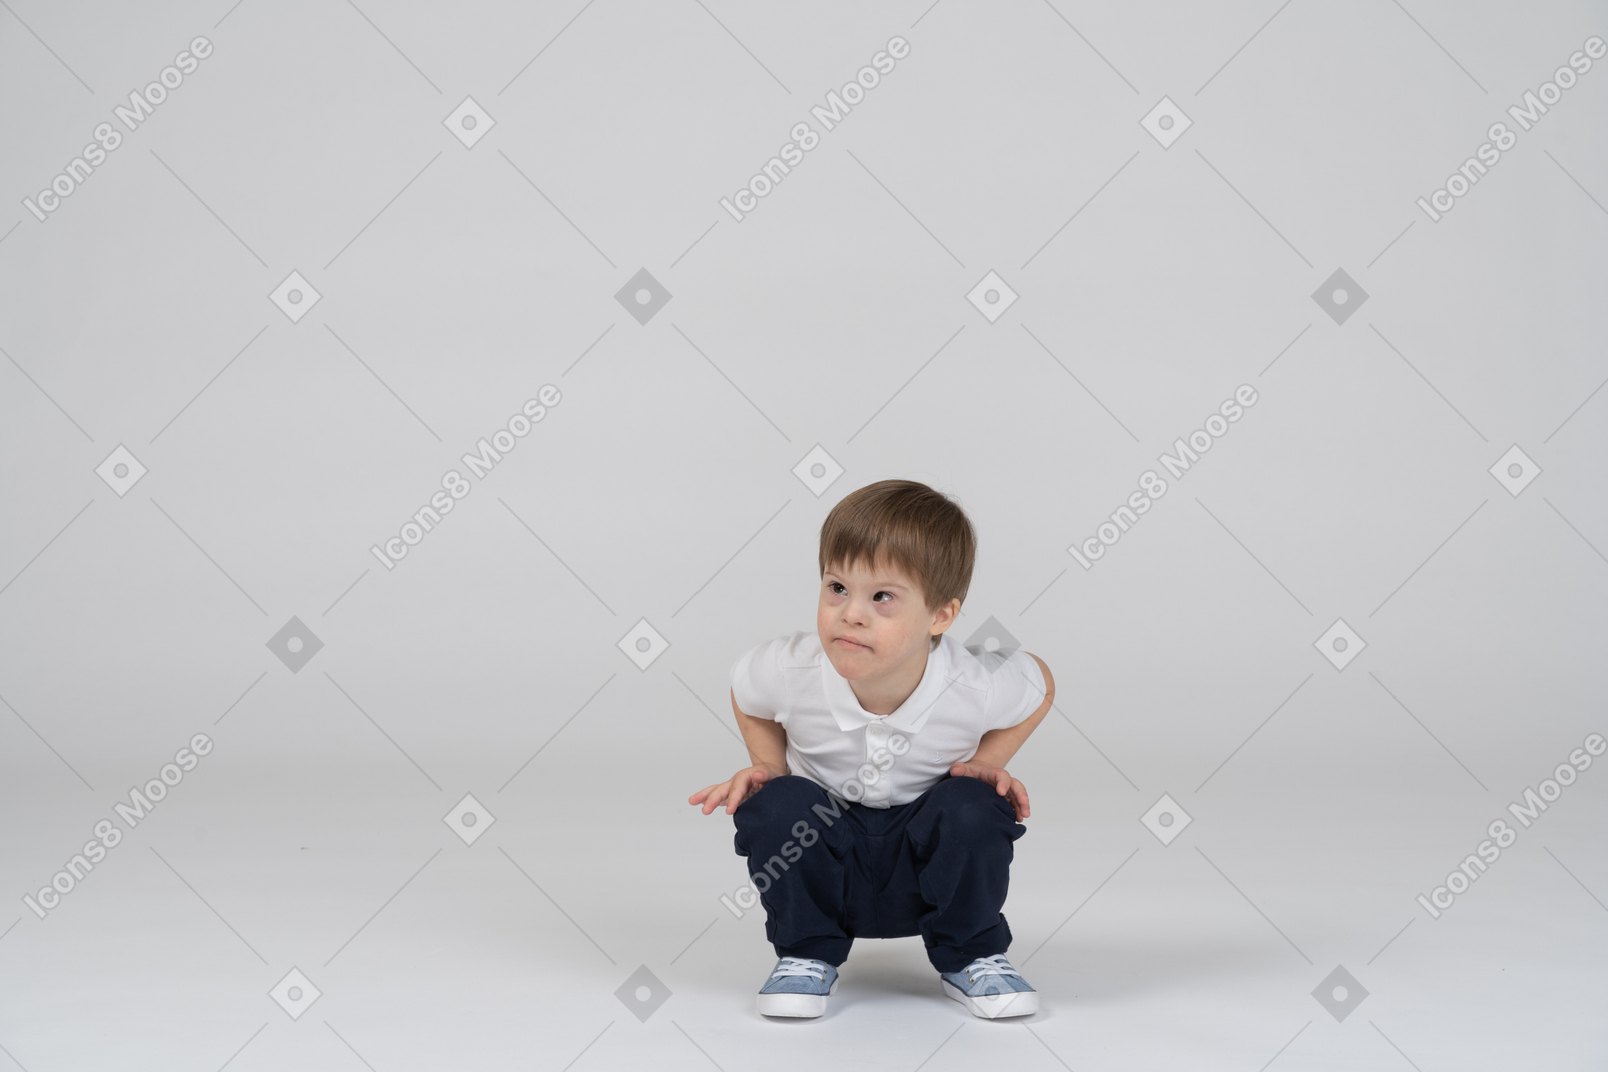 A boy standing in front of an empty wall